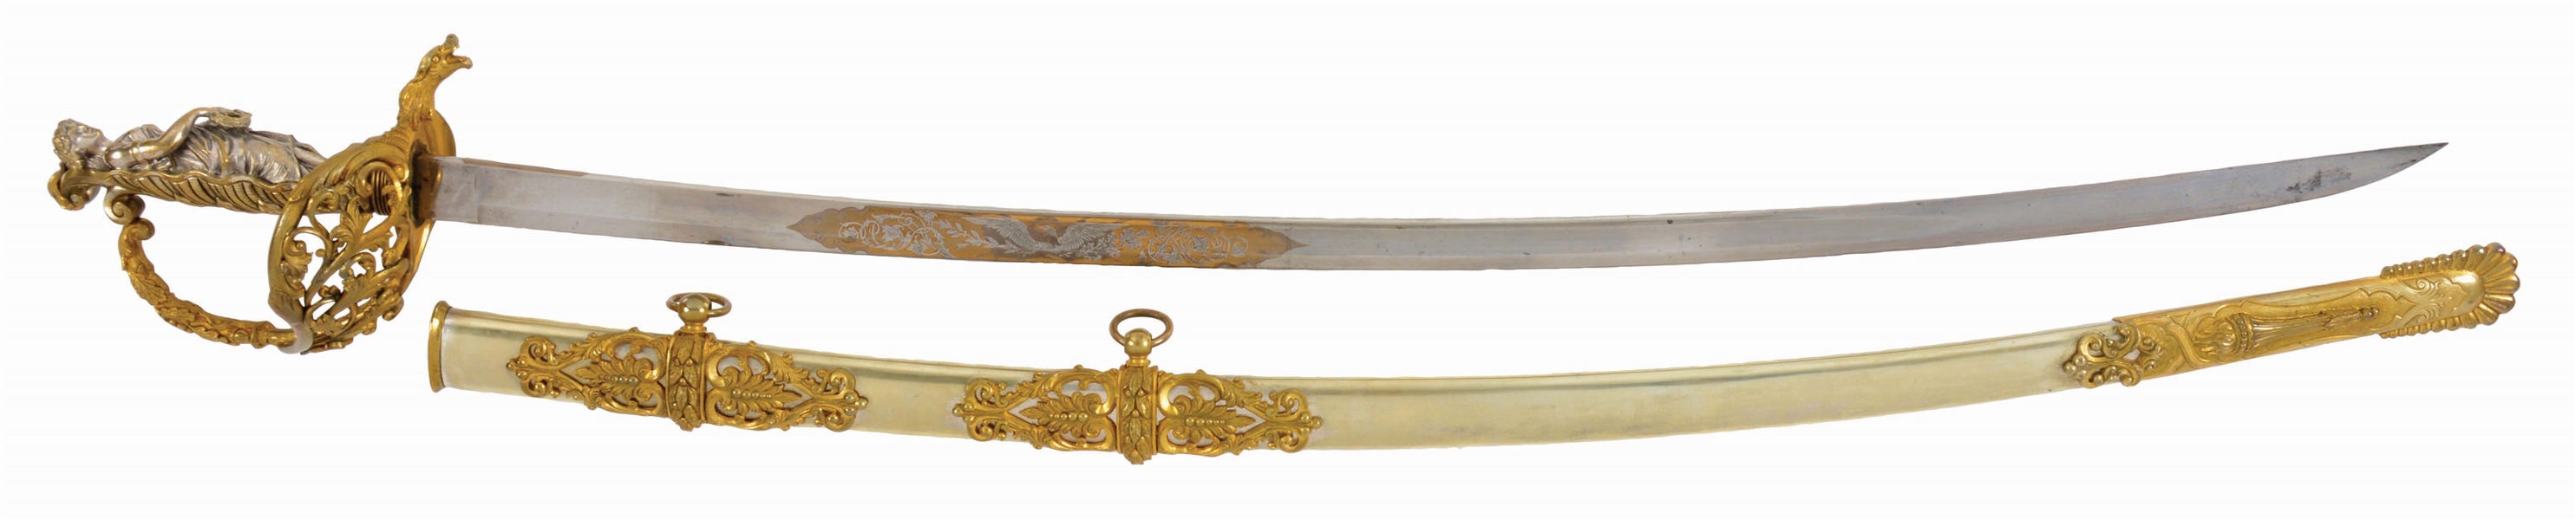 FINE STATUE HILTED PRESENTATION SWORD OF CAPTAIN CHARLES W. BAXTER.